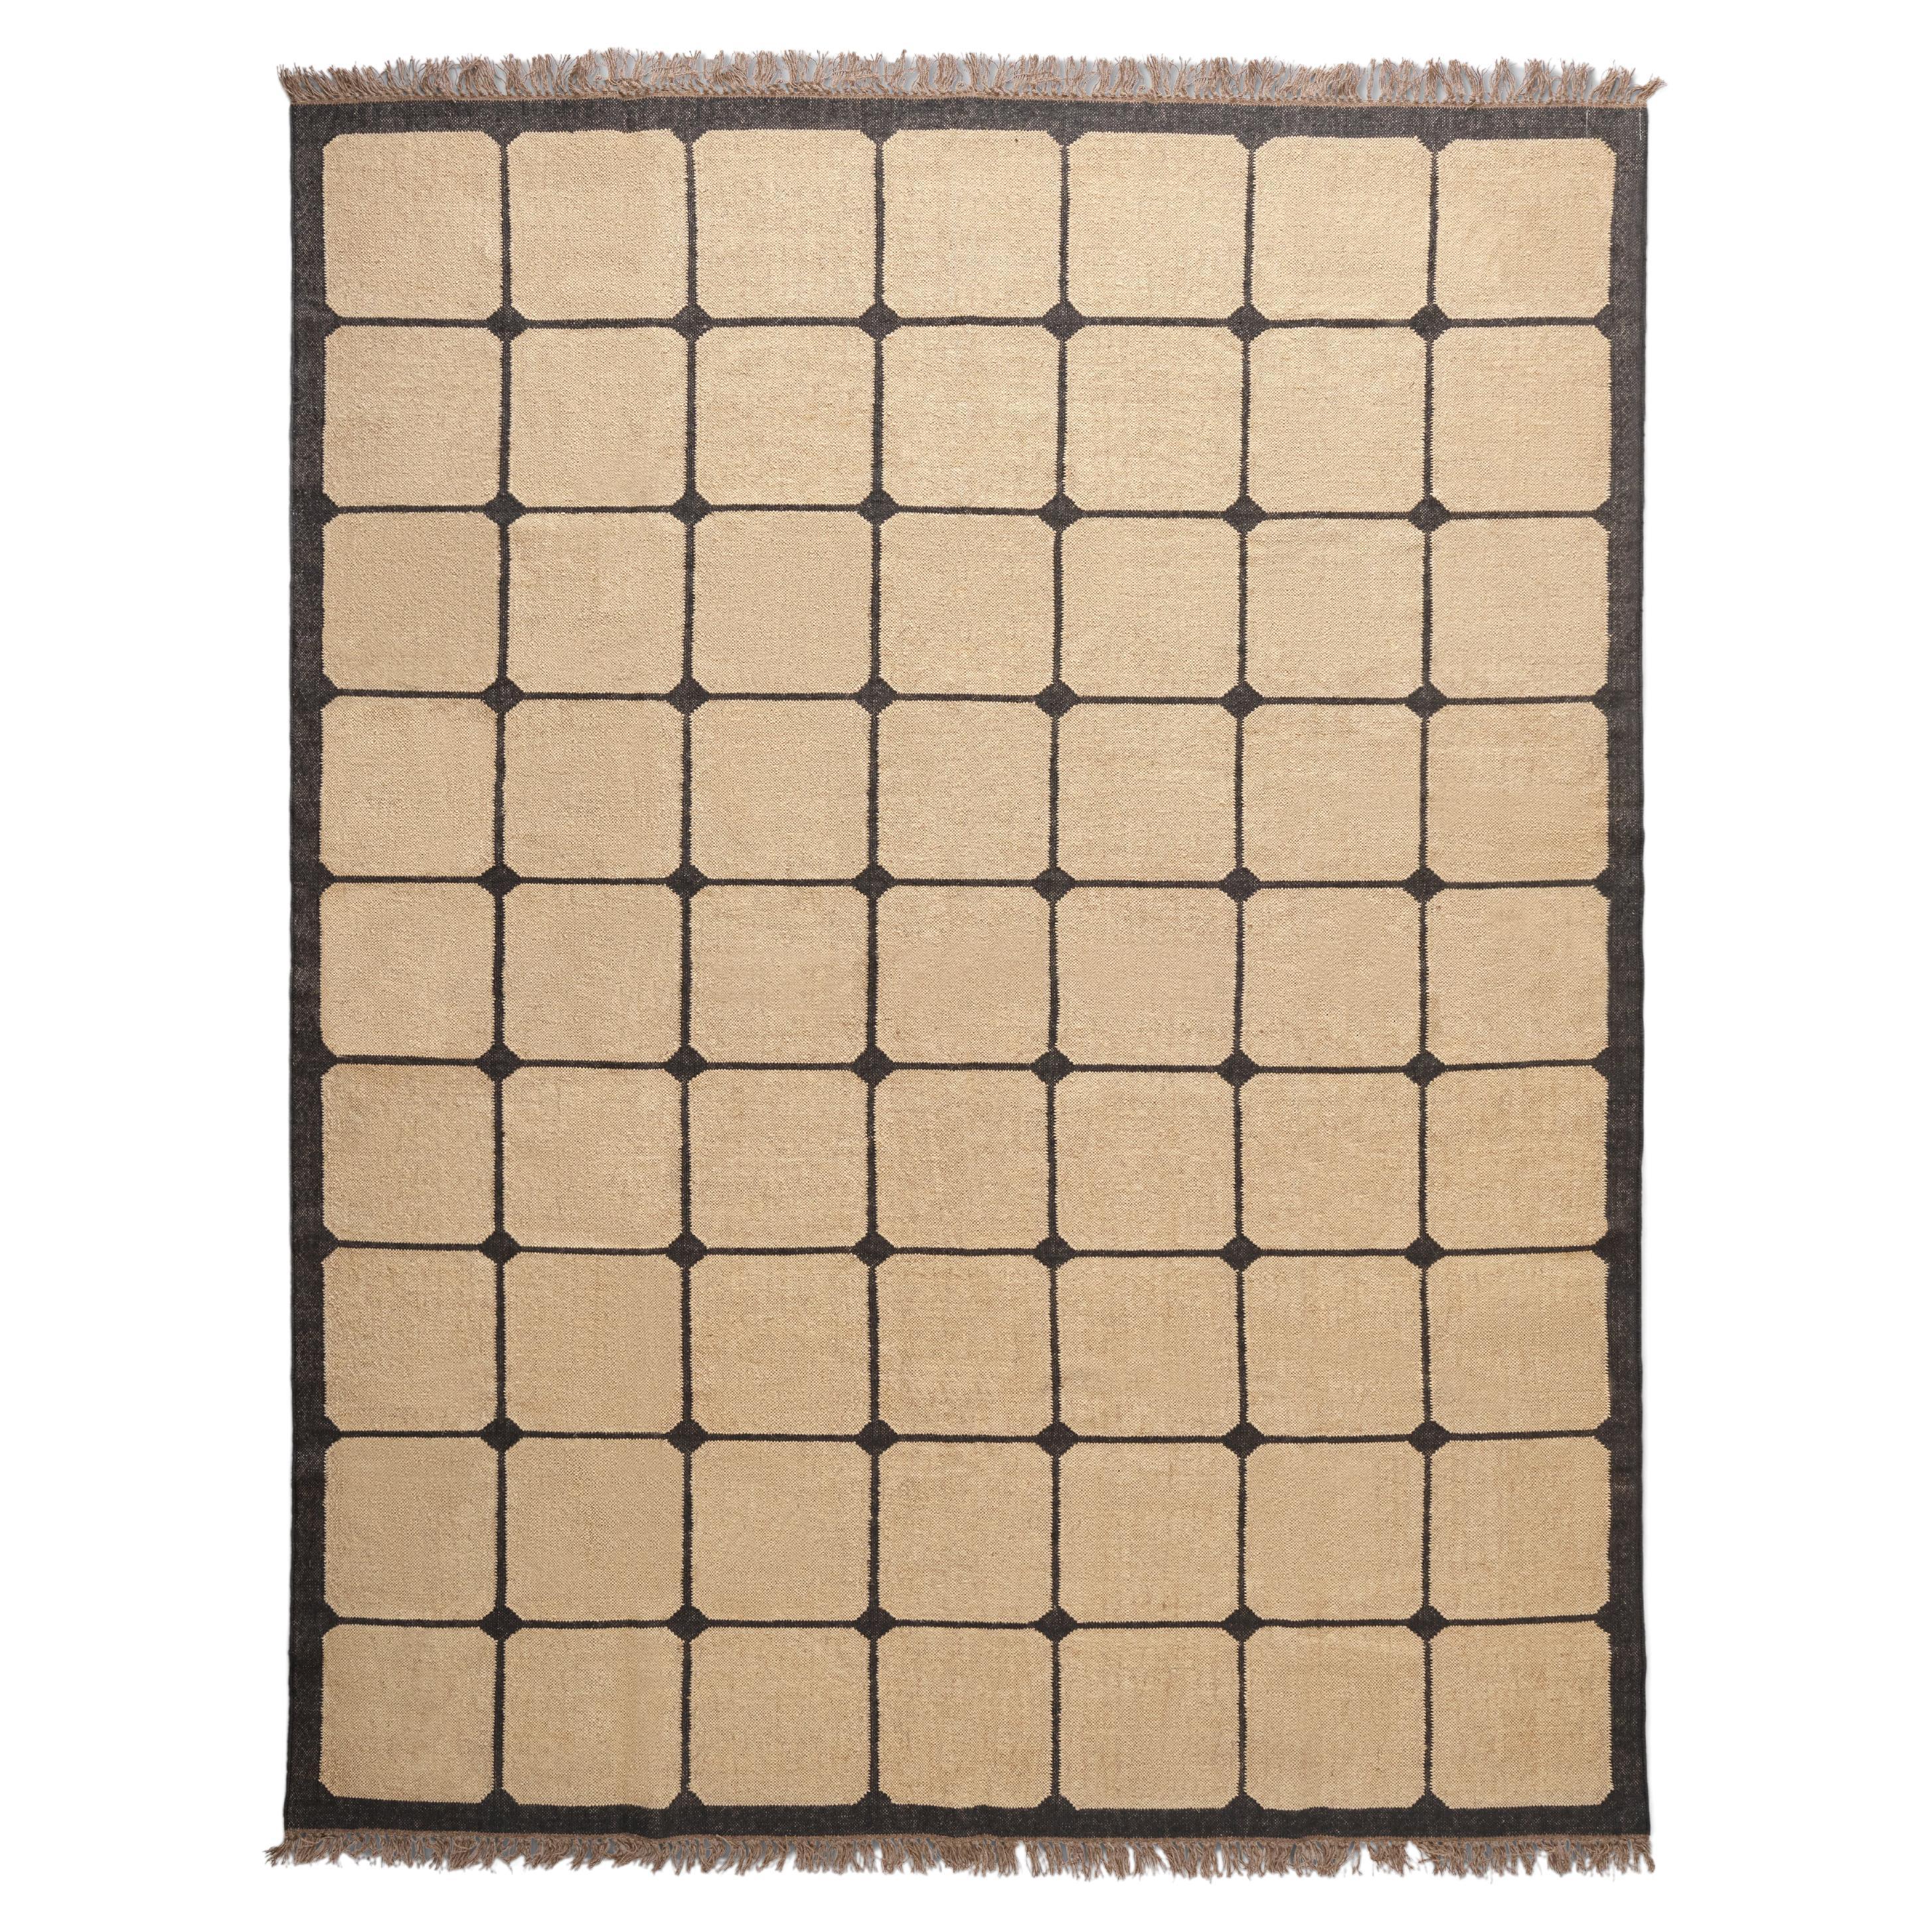 The Forsyth Checkerboard Rug - Tile Checks in Off Black, 9x12 For Sale